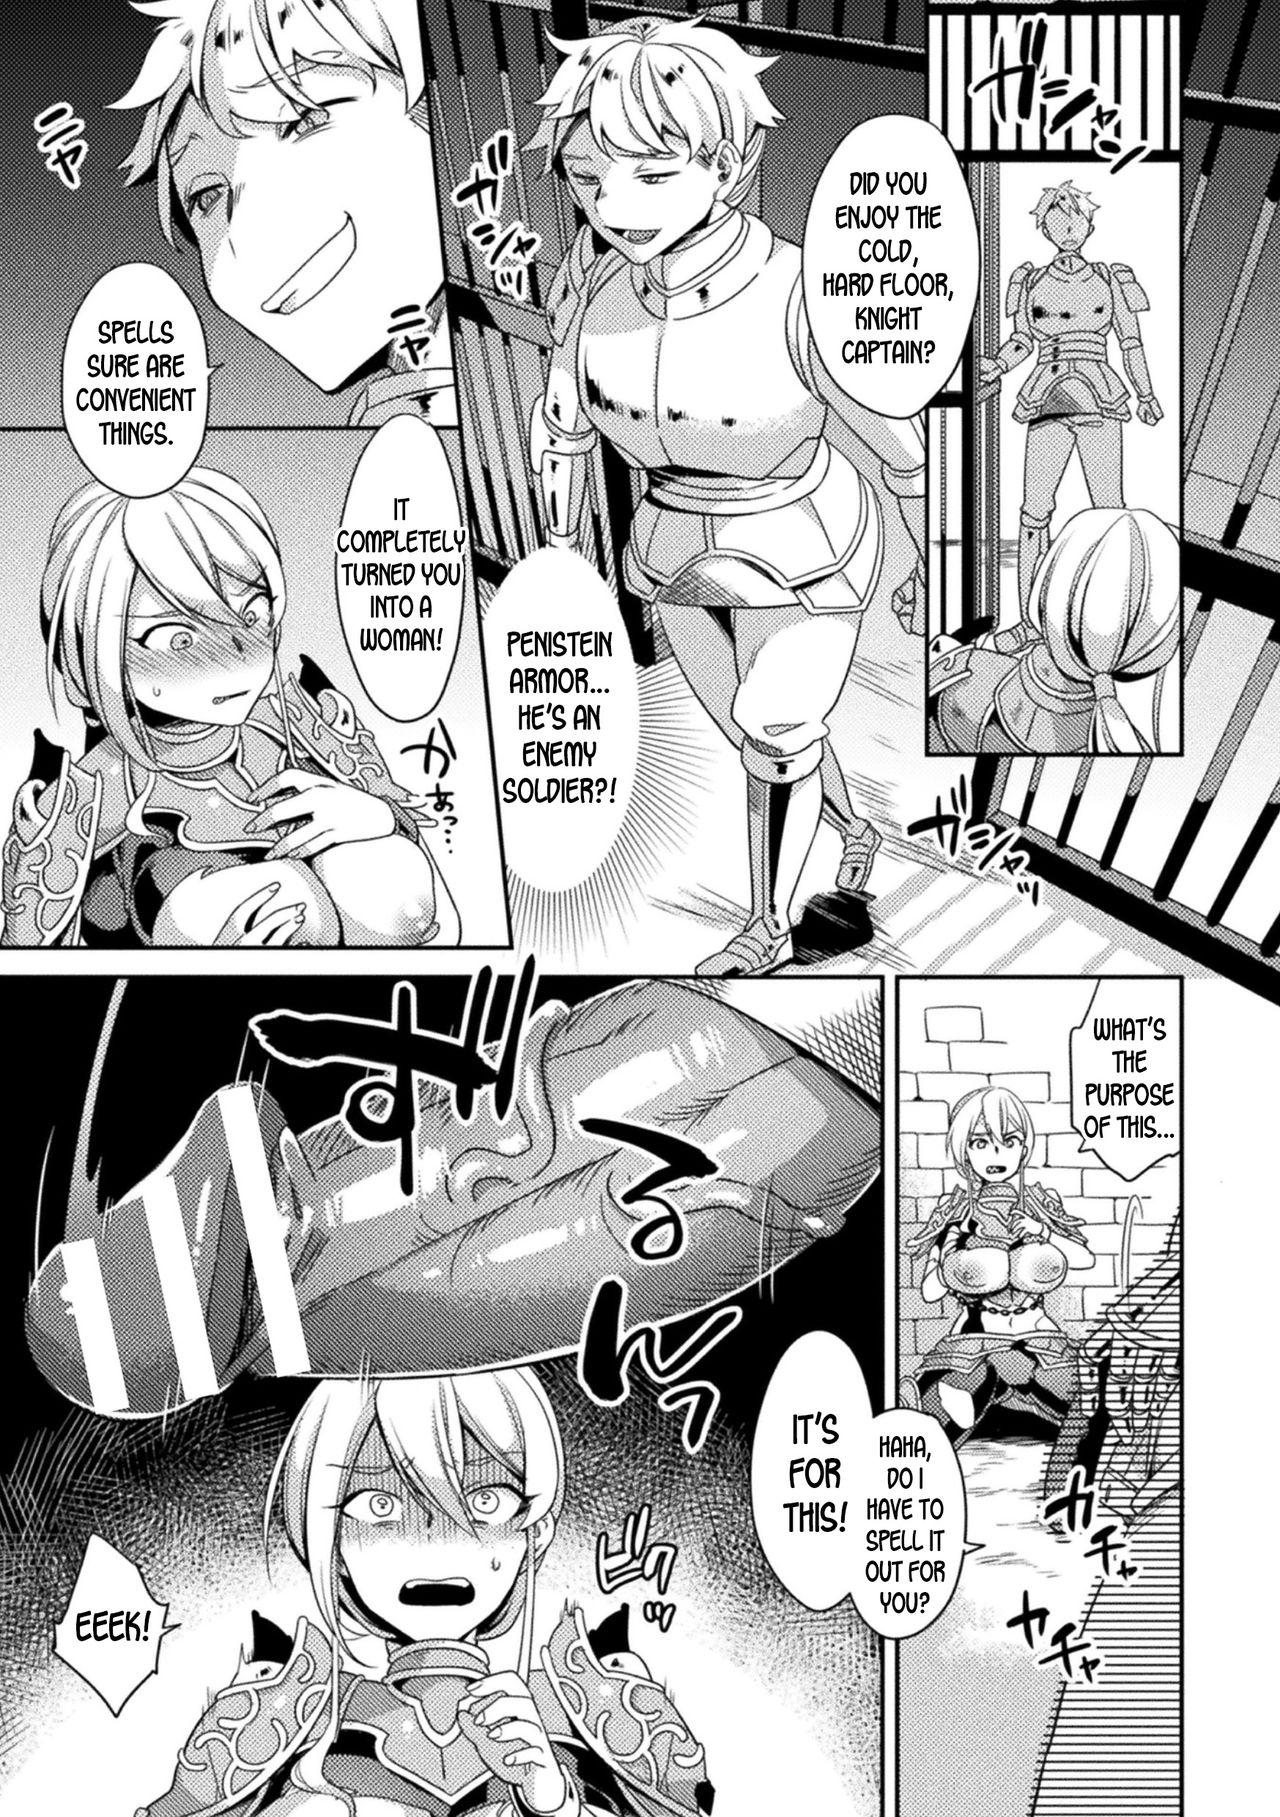 Lesbo Genderbent Knight Raul, the Fallen Whore ~ He couldn't win against money and cocks Ametuer Porn - Page 3